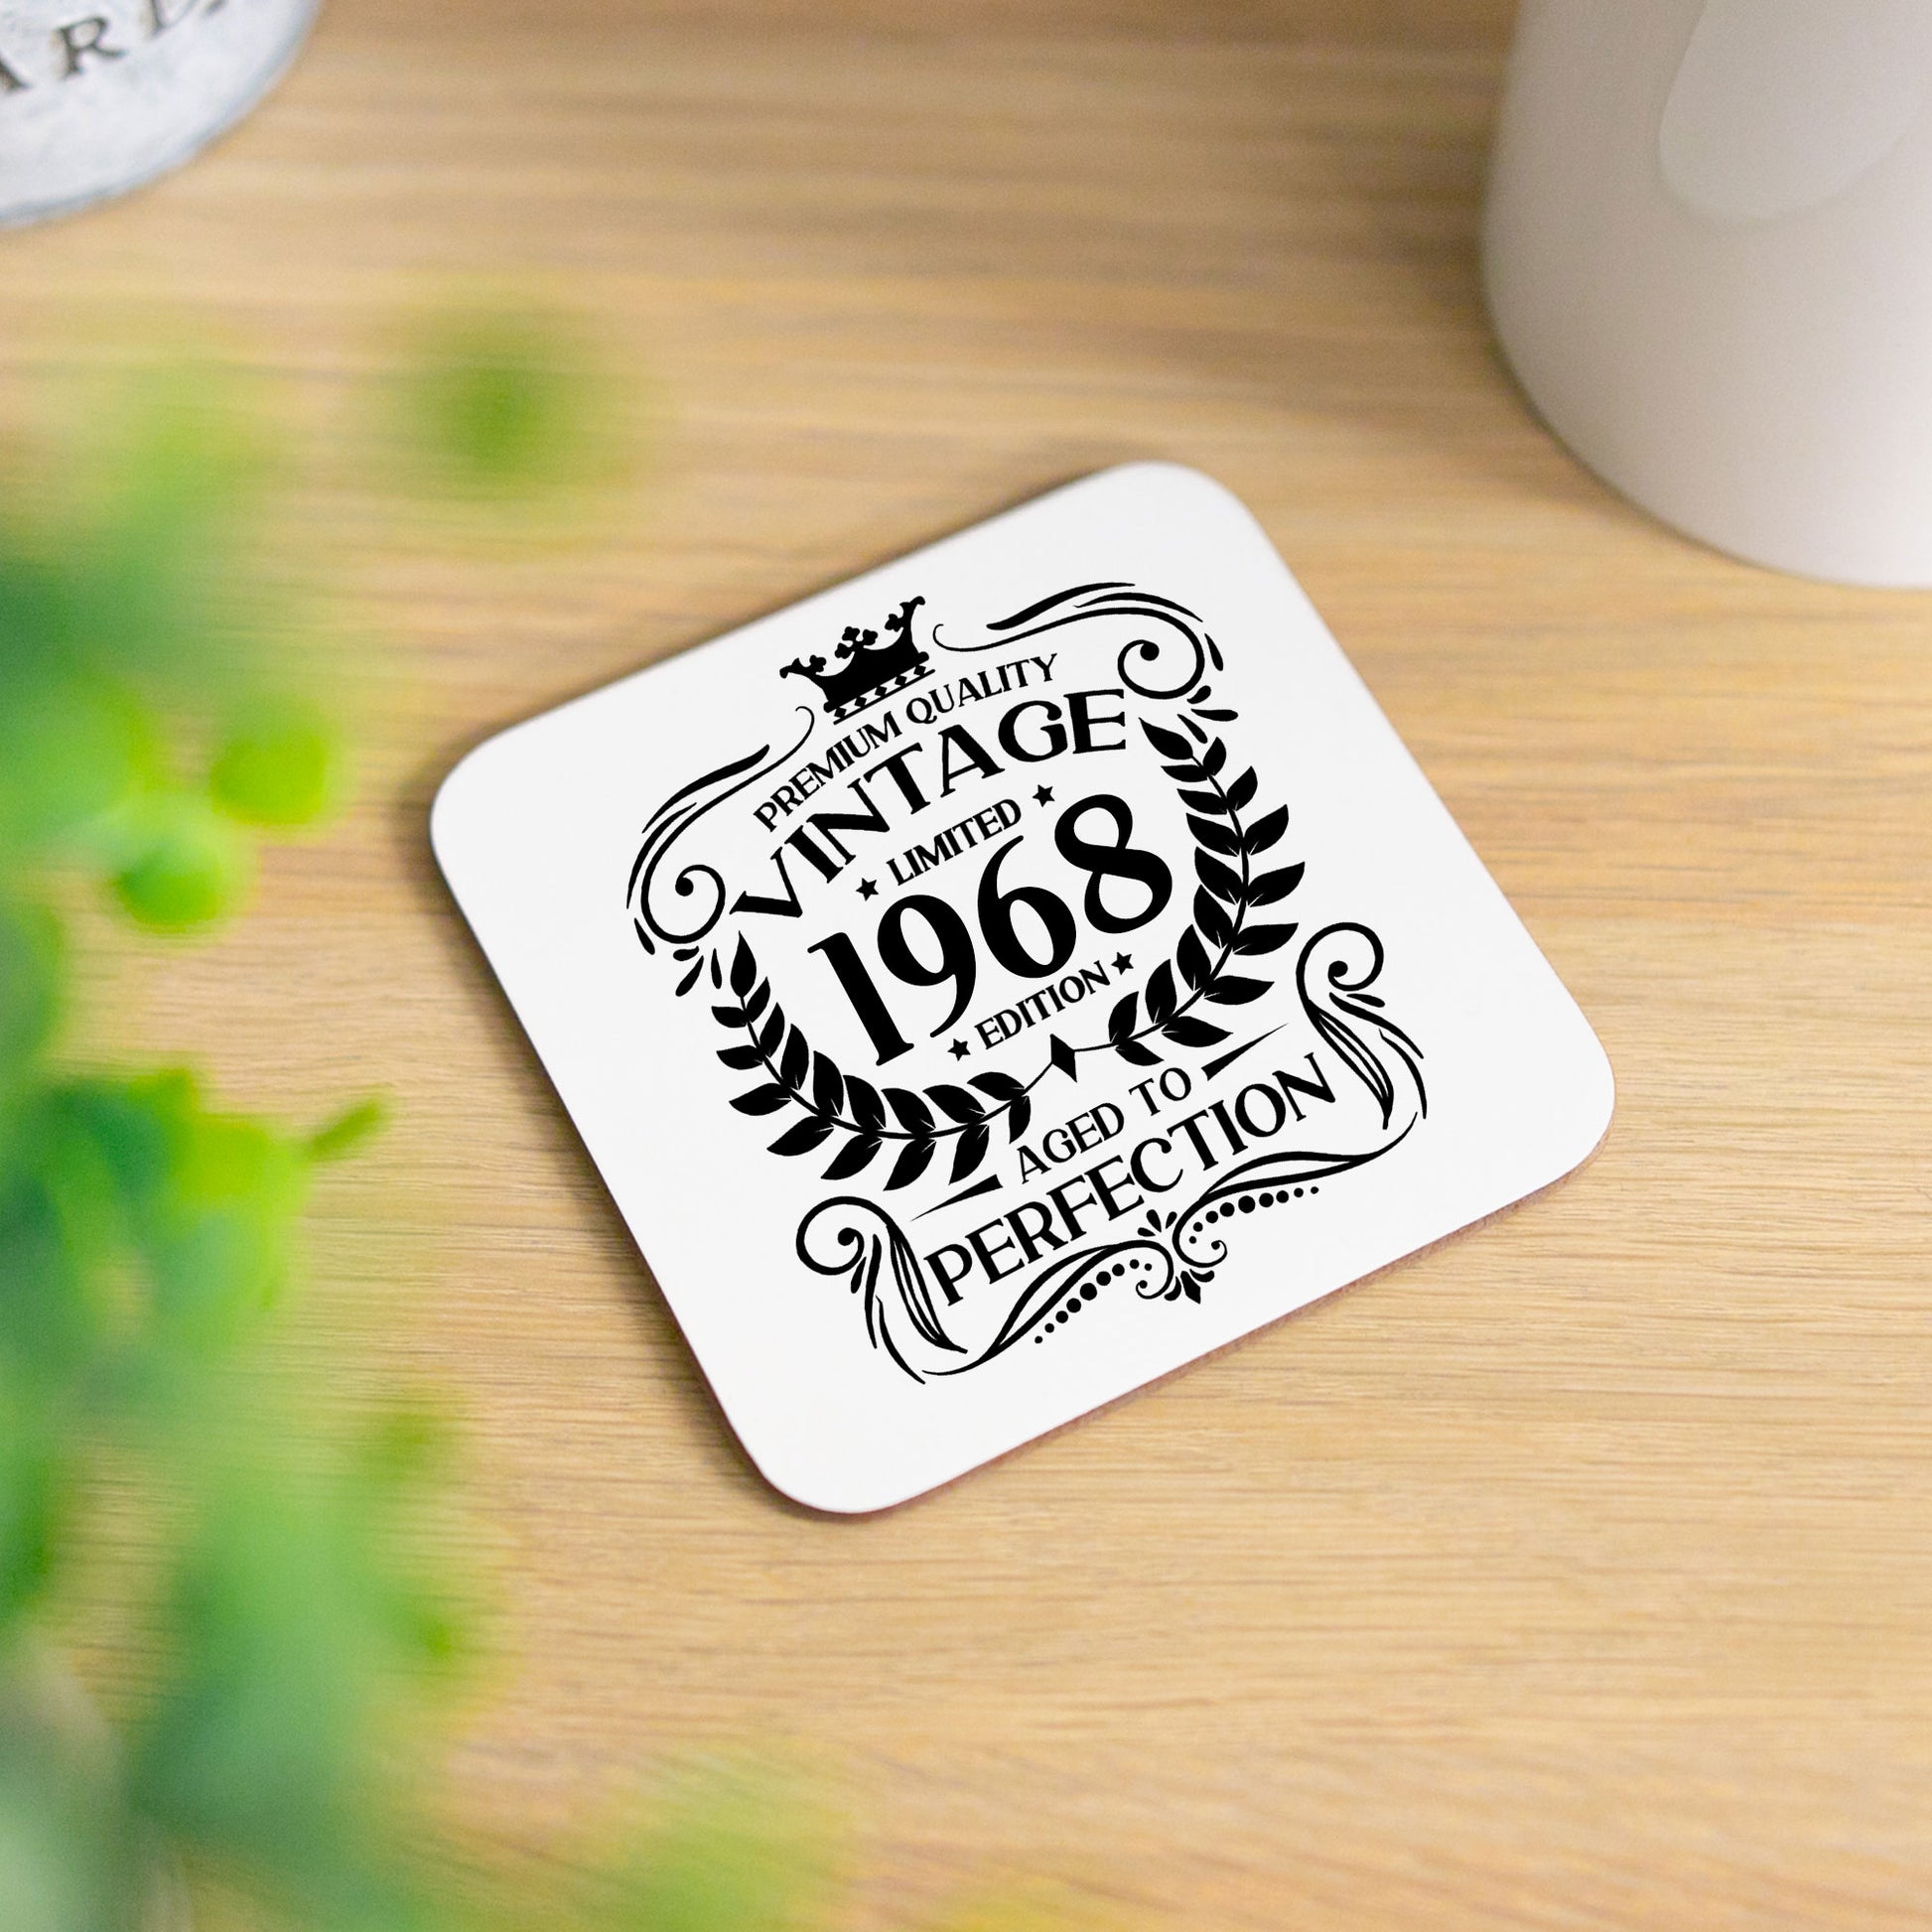 Vintage 1968 55th Birthday Engraved Wine Glass Gift  - Always Looking Good - Glass & Printed Coaster  